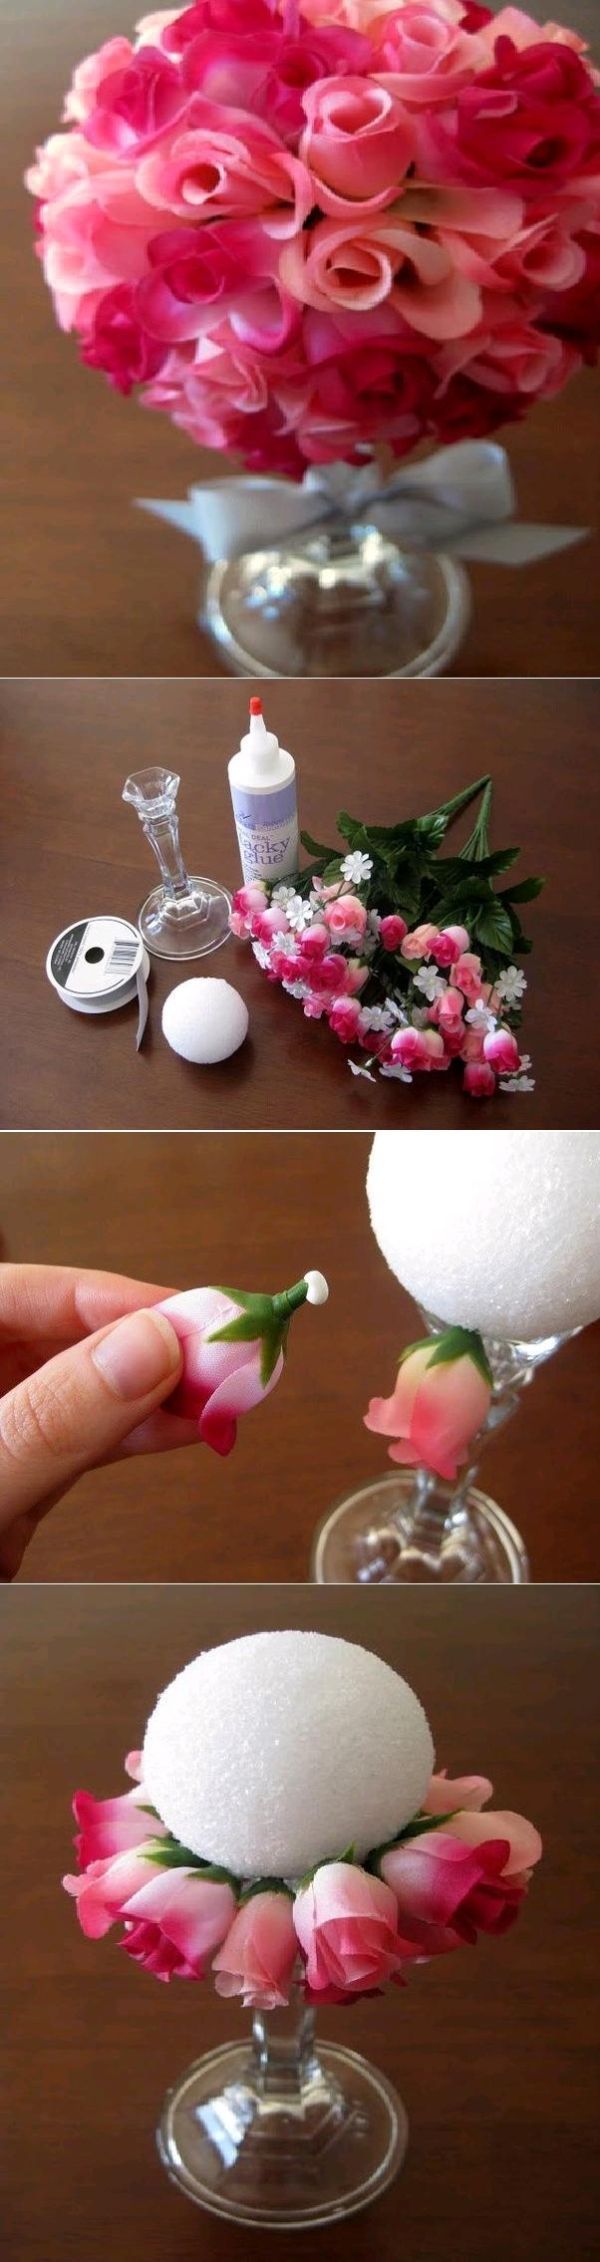 DIY Flower Ball Bouquet- this would also make a nice favor if you do it in a smaller size its unique you could start as a winter